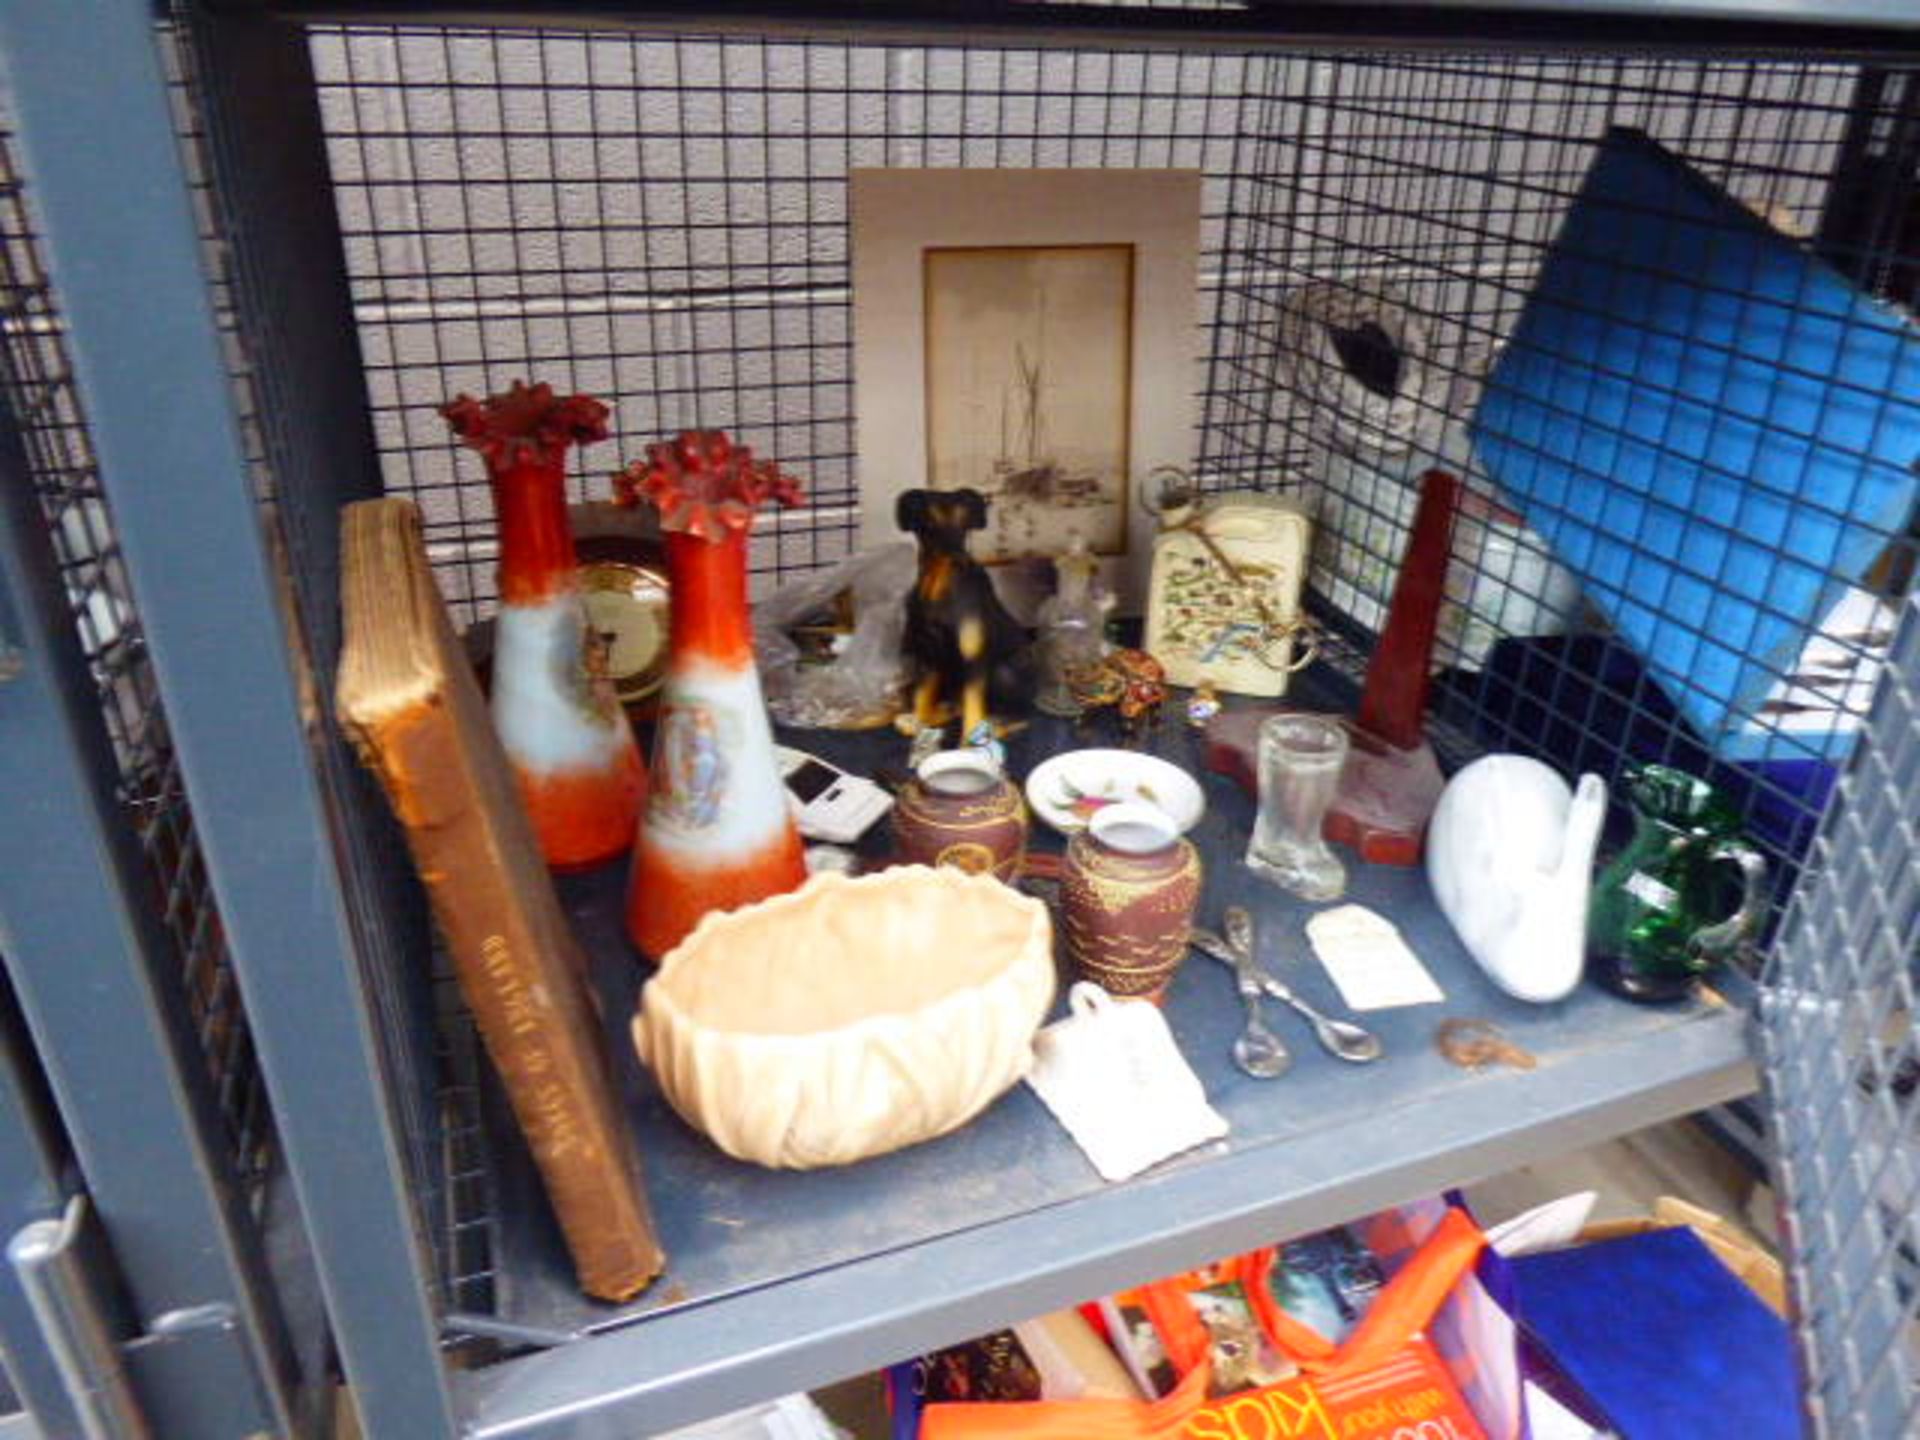 Cage containing ornamental figures, Japanese vases, glassware, crested ware, and a mantel clock